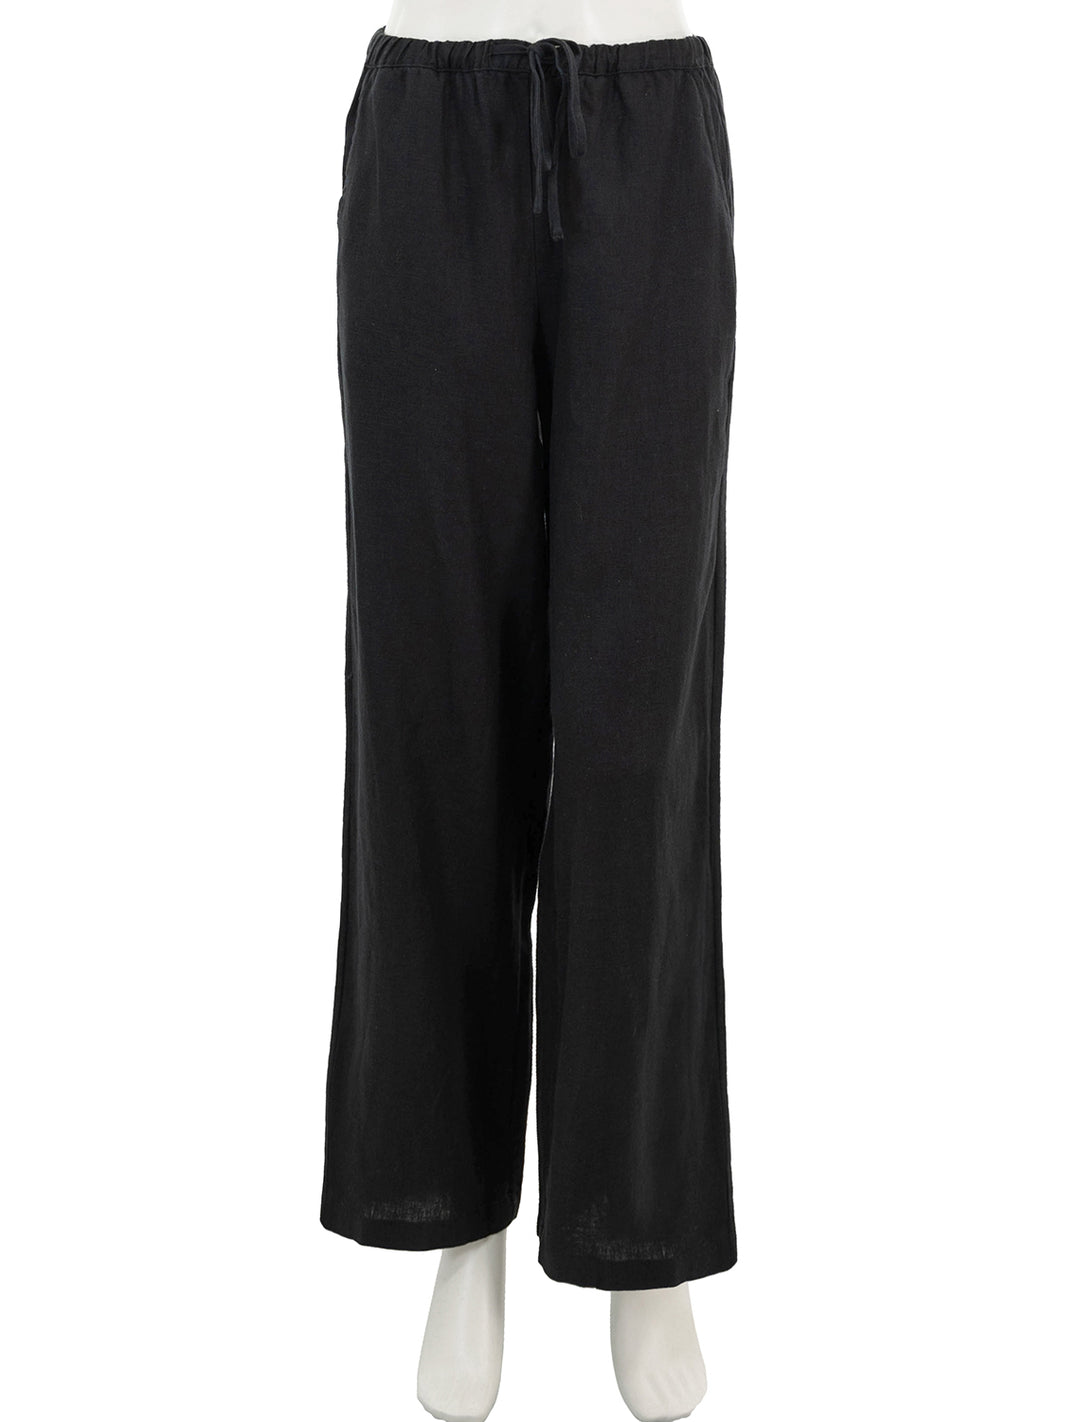 Front view of Rails' emmie linen pants in black.